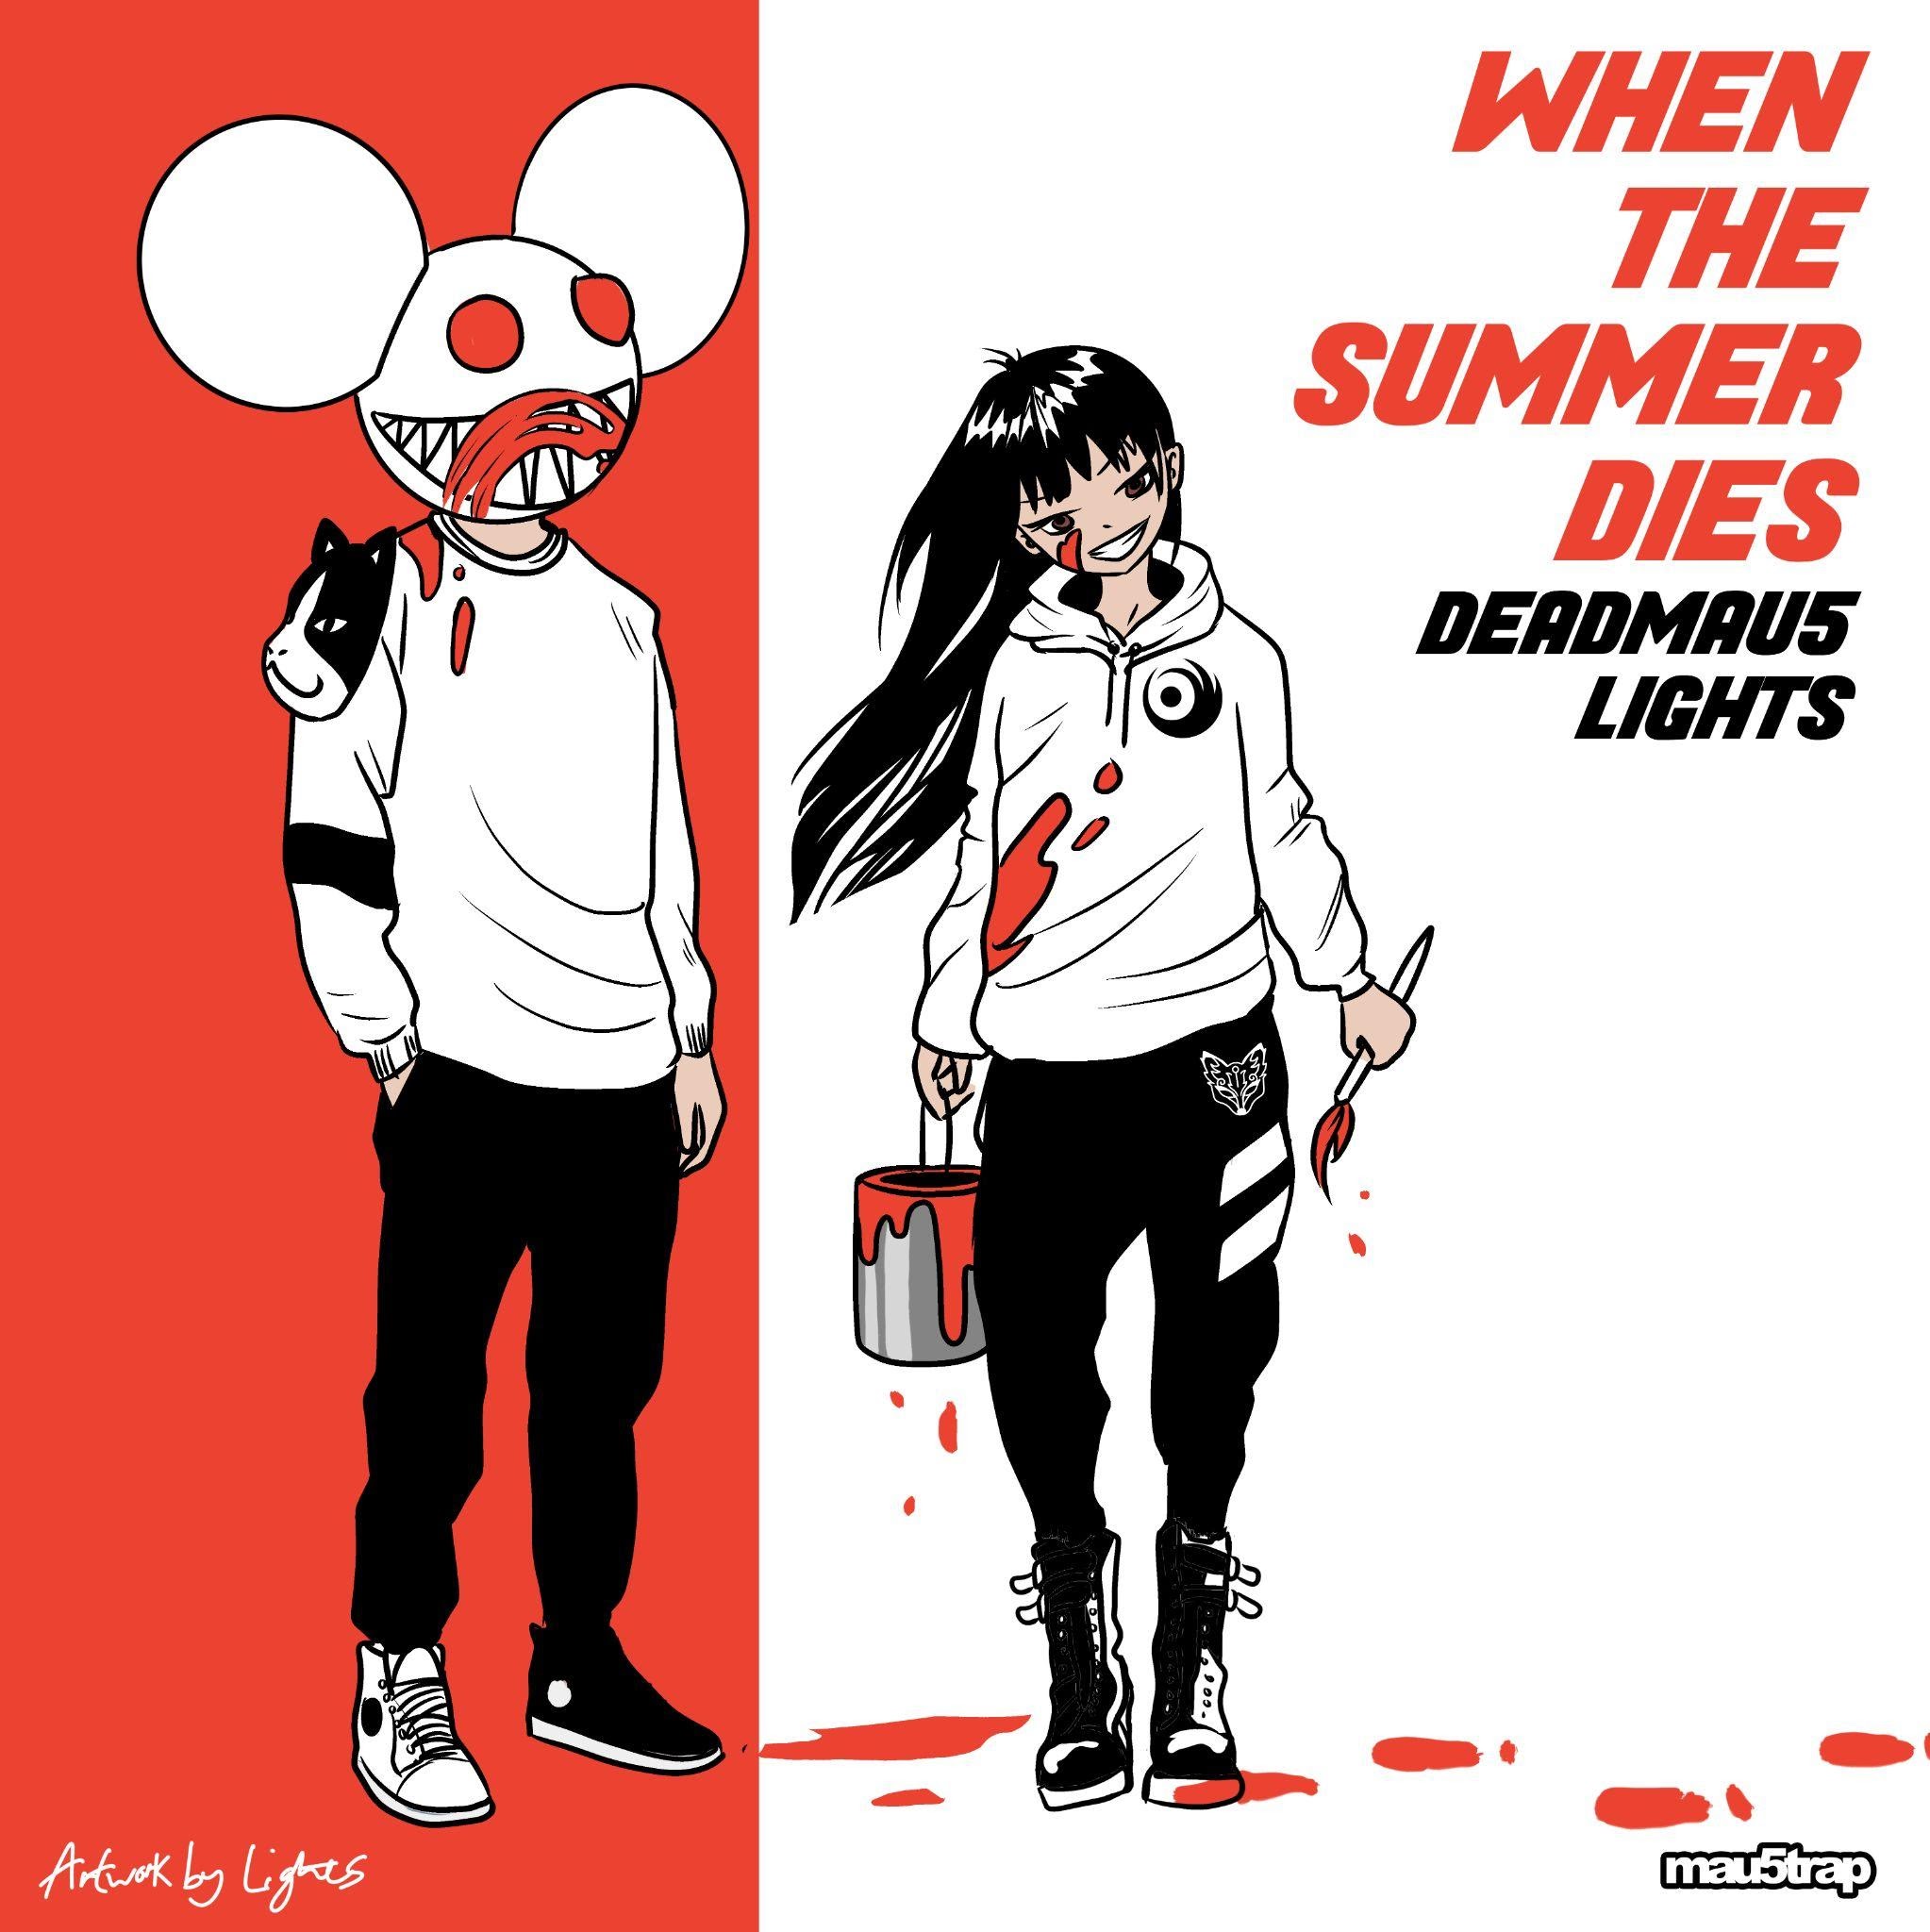 deadmau5 & Lights New Single "When The Summer Dies" Out Now On mau5trap